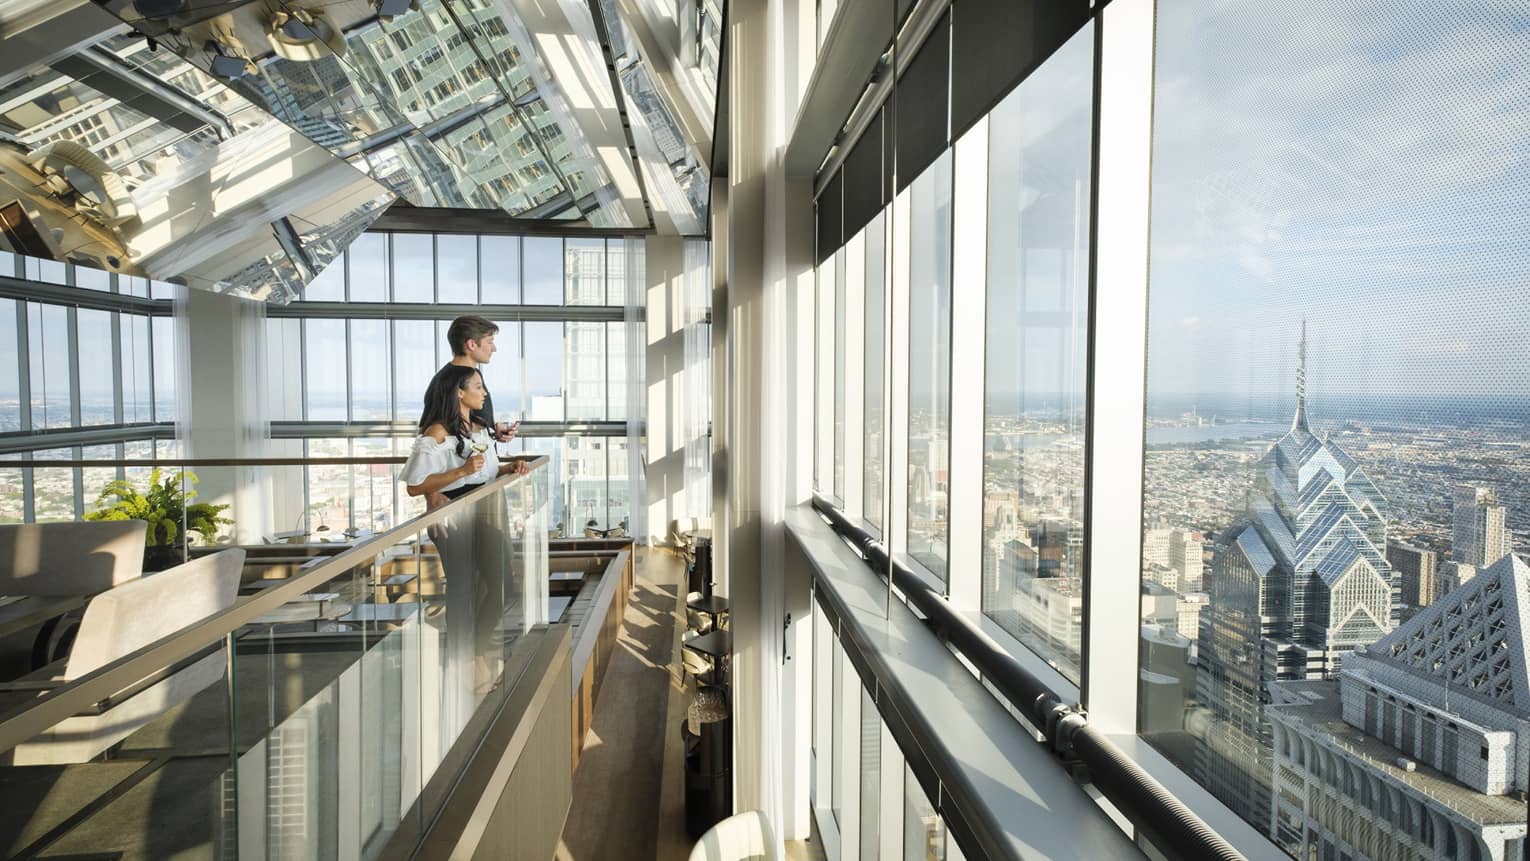 A man and woman looking out of a large window in a restaurant on a high floor of a building.